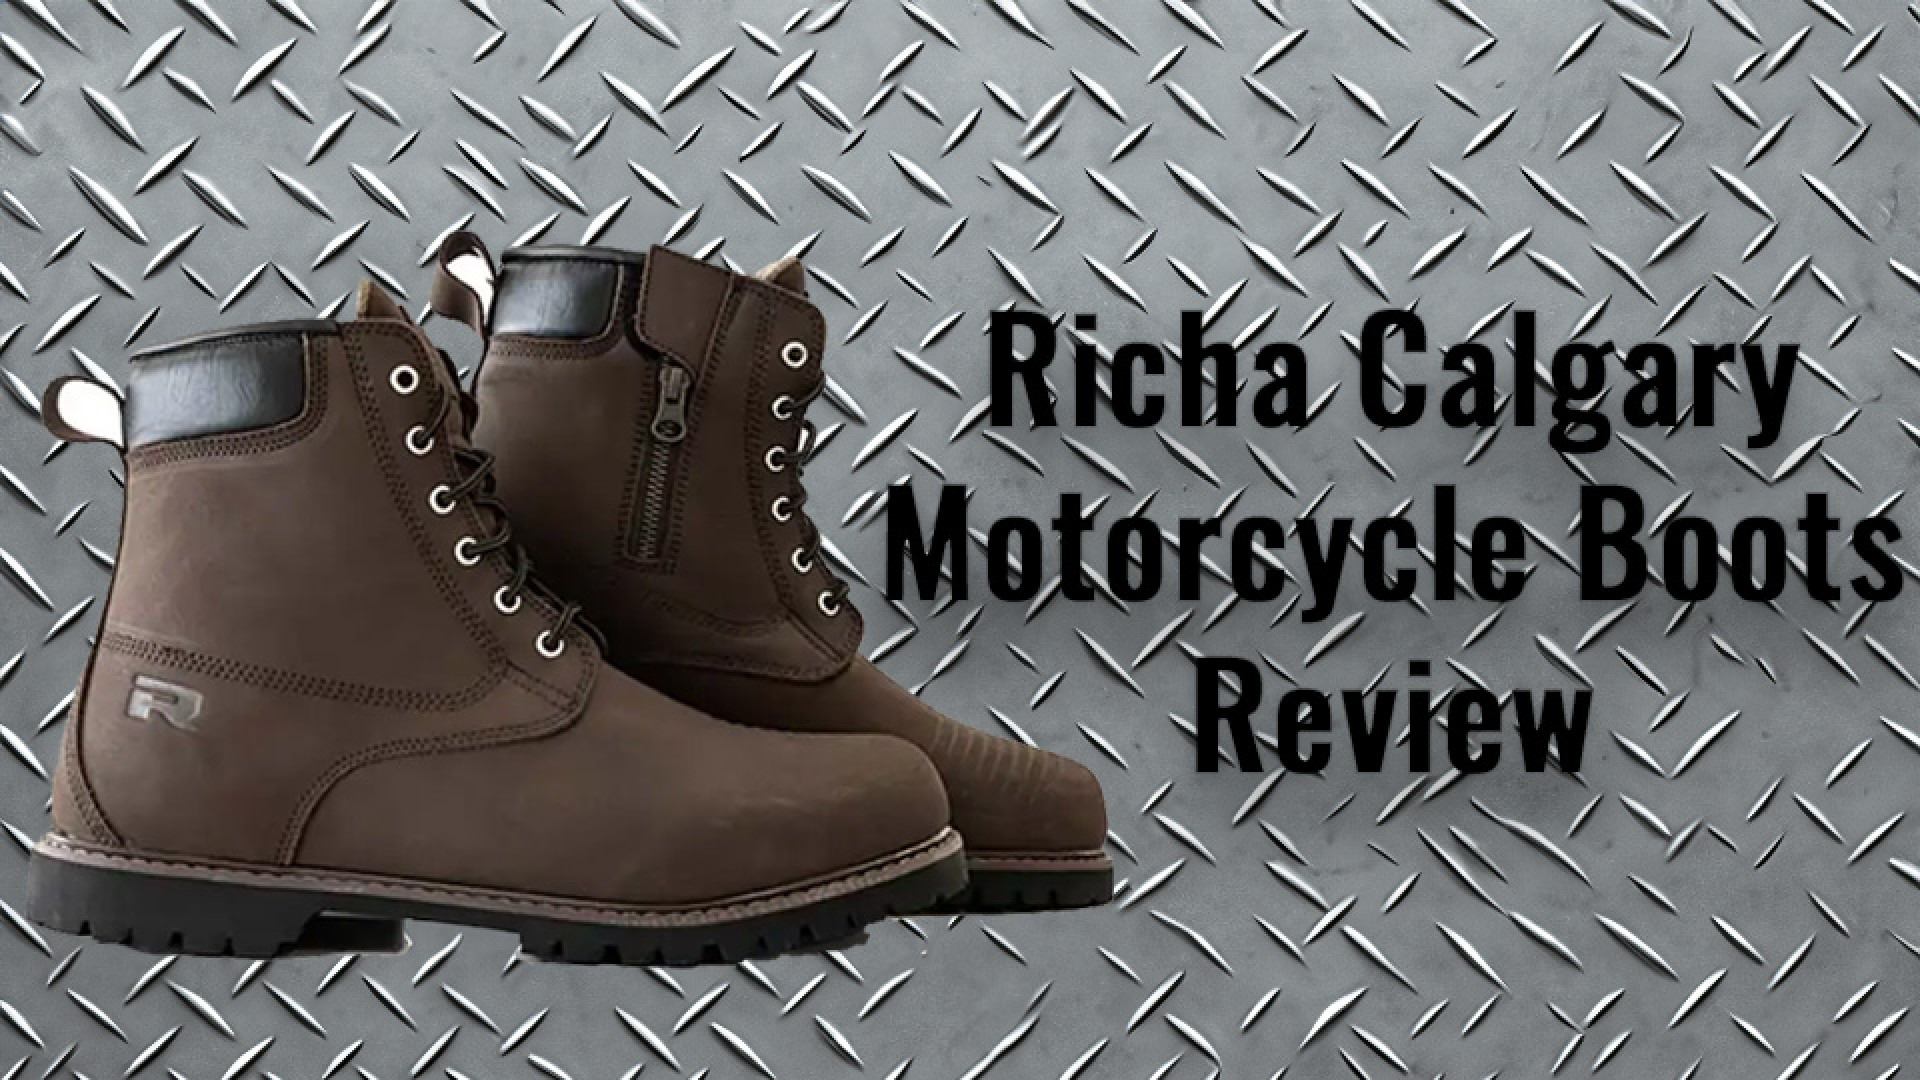 https://www.raceleathers.co.uk/image/cache/catalog/Blog%20Images/Richa%20Calgary%20Motorcycle%20Boots%20Review-1920x1080.jpg